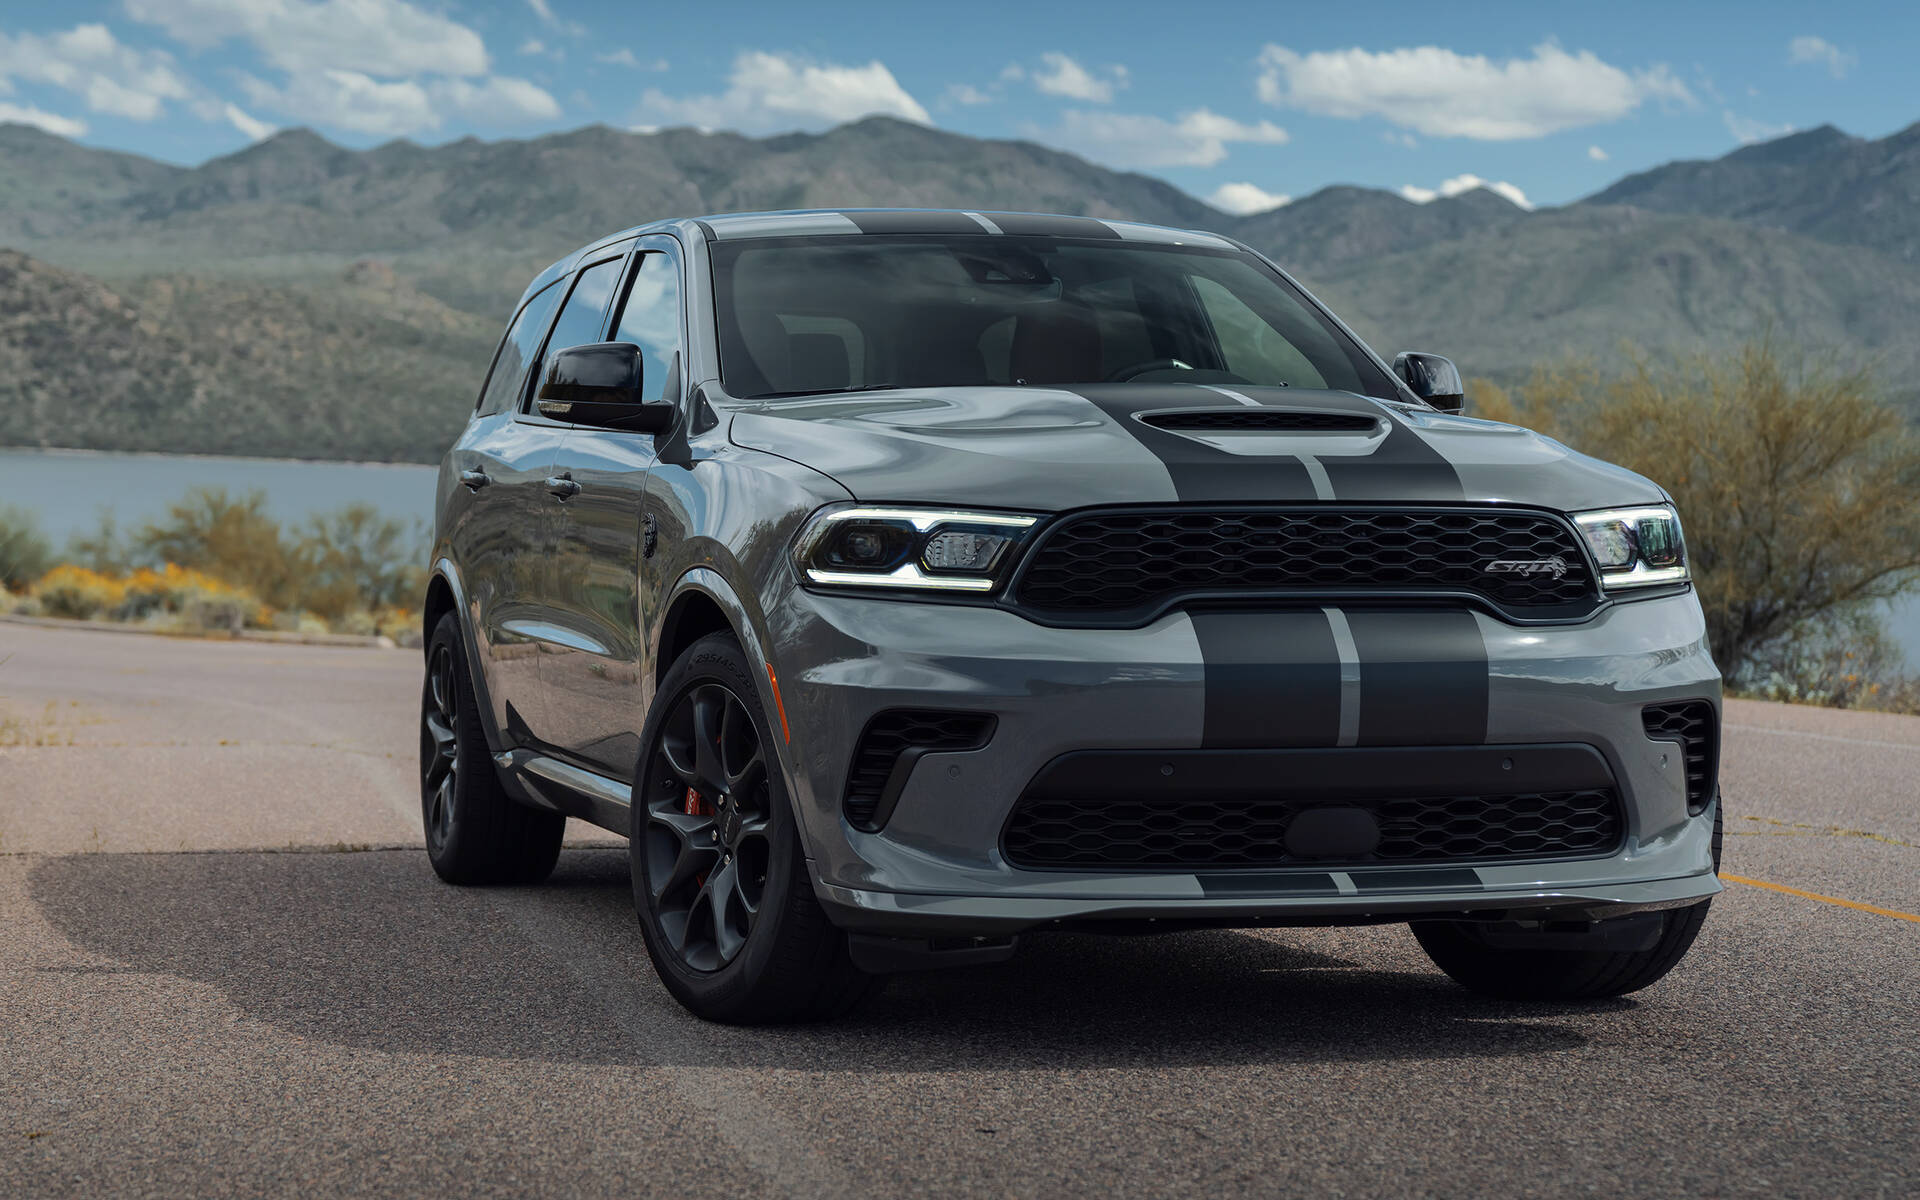 2021 Dodge Durango: Five Things to Know - The Car Guide